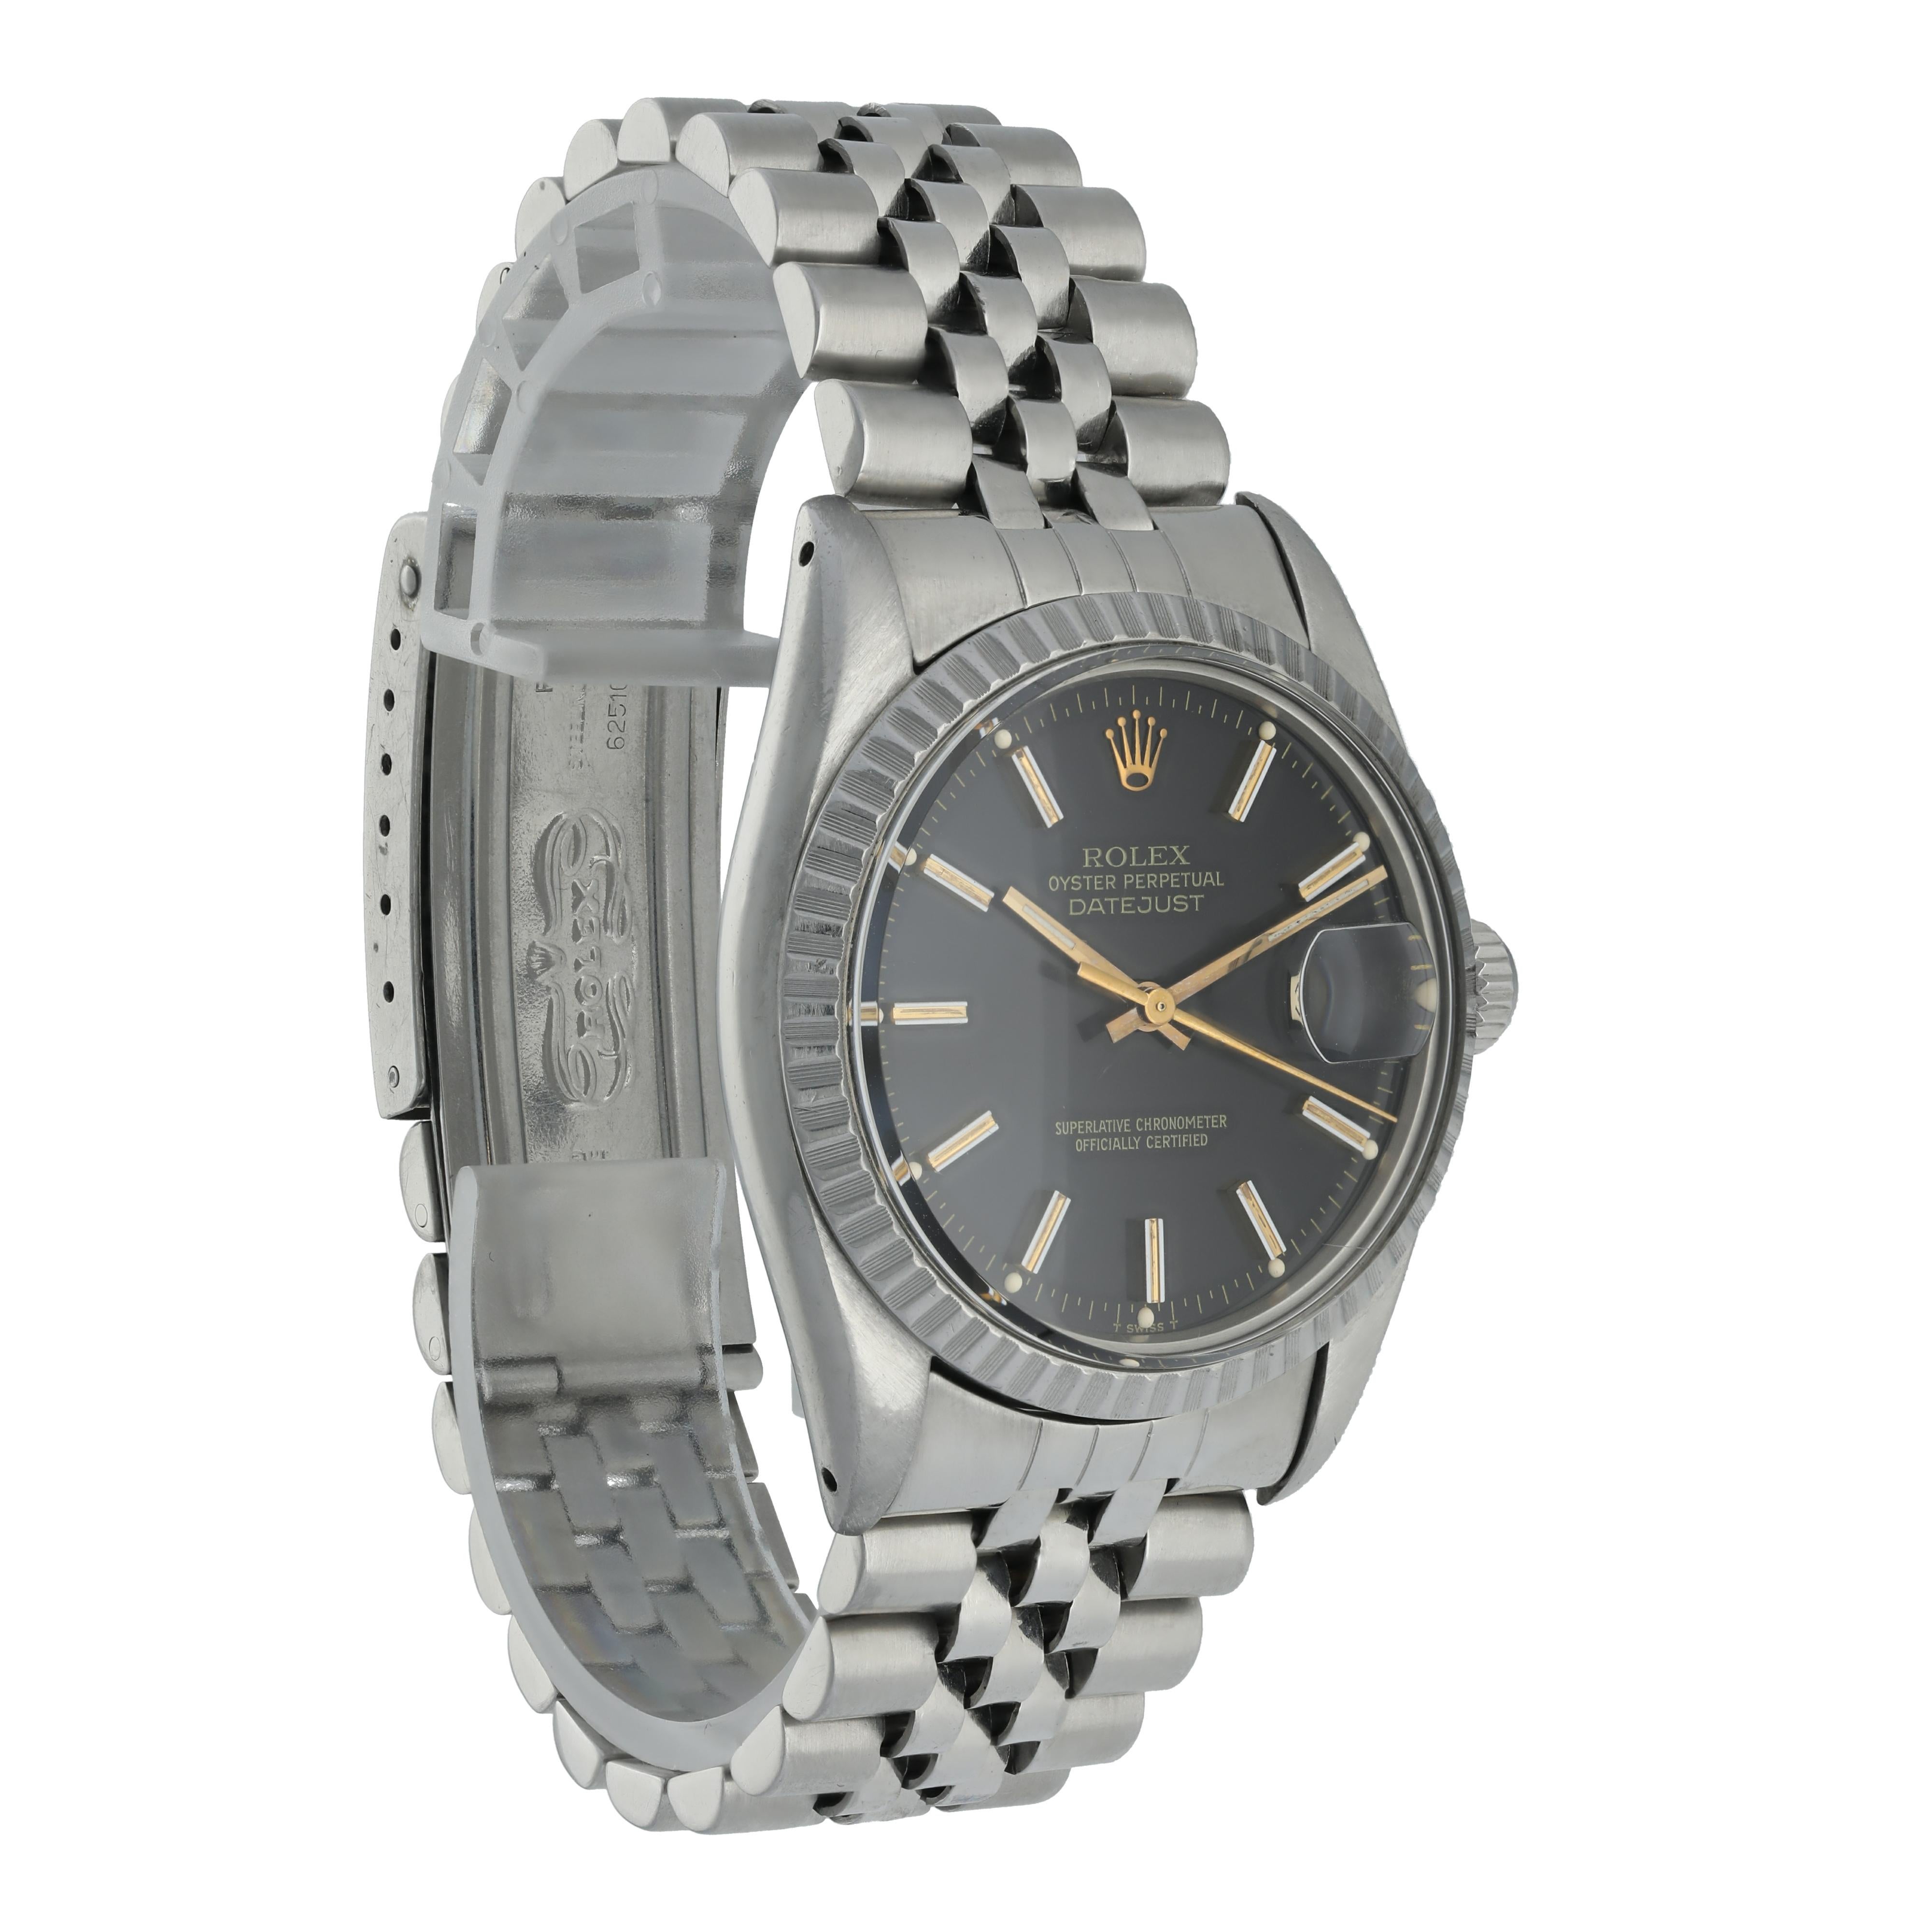 Rolex Datejust 16030 Men's Watch In Excellent Condition For Sale In New York, NY